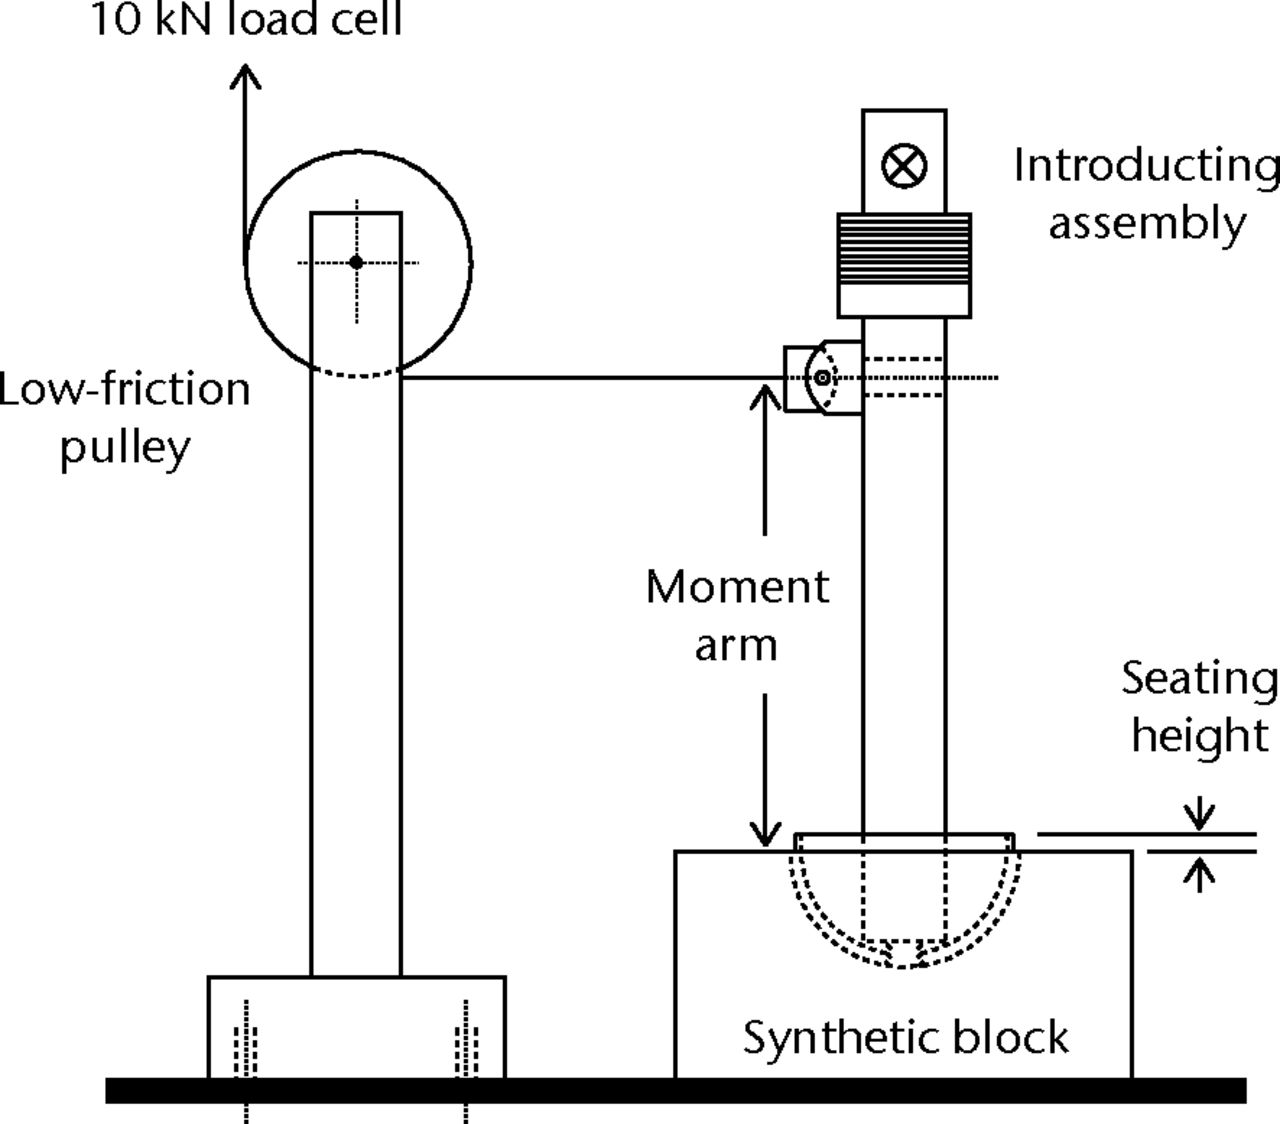 Fig. 2 
            Diagrammatic illustration of the moment
arm determined for ‘lever-out’ testing. A steel cable, low friction
pulley and universal connection are used to apply a lever-out moment
to the introducing assembly. The moment arm was defined by the distance of
the universal joint from the surface of the synthetic block.
          